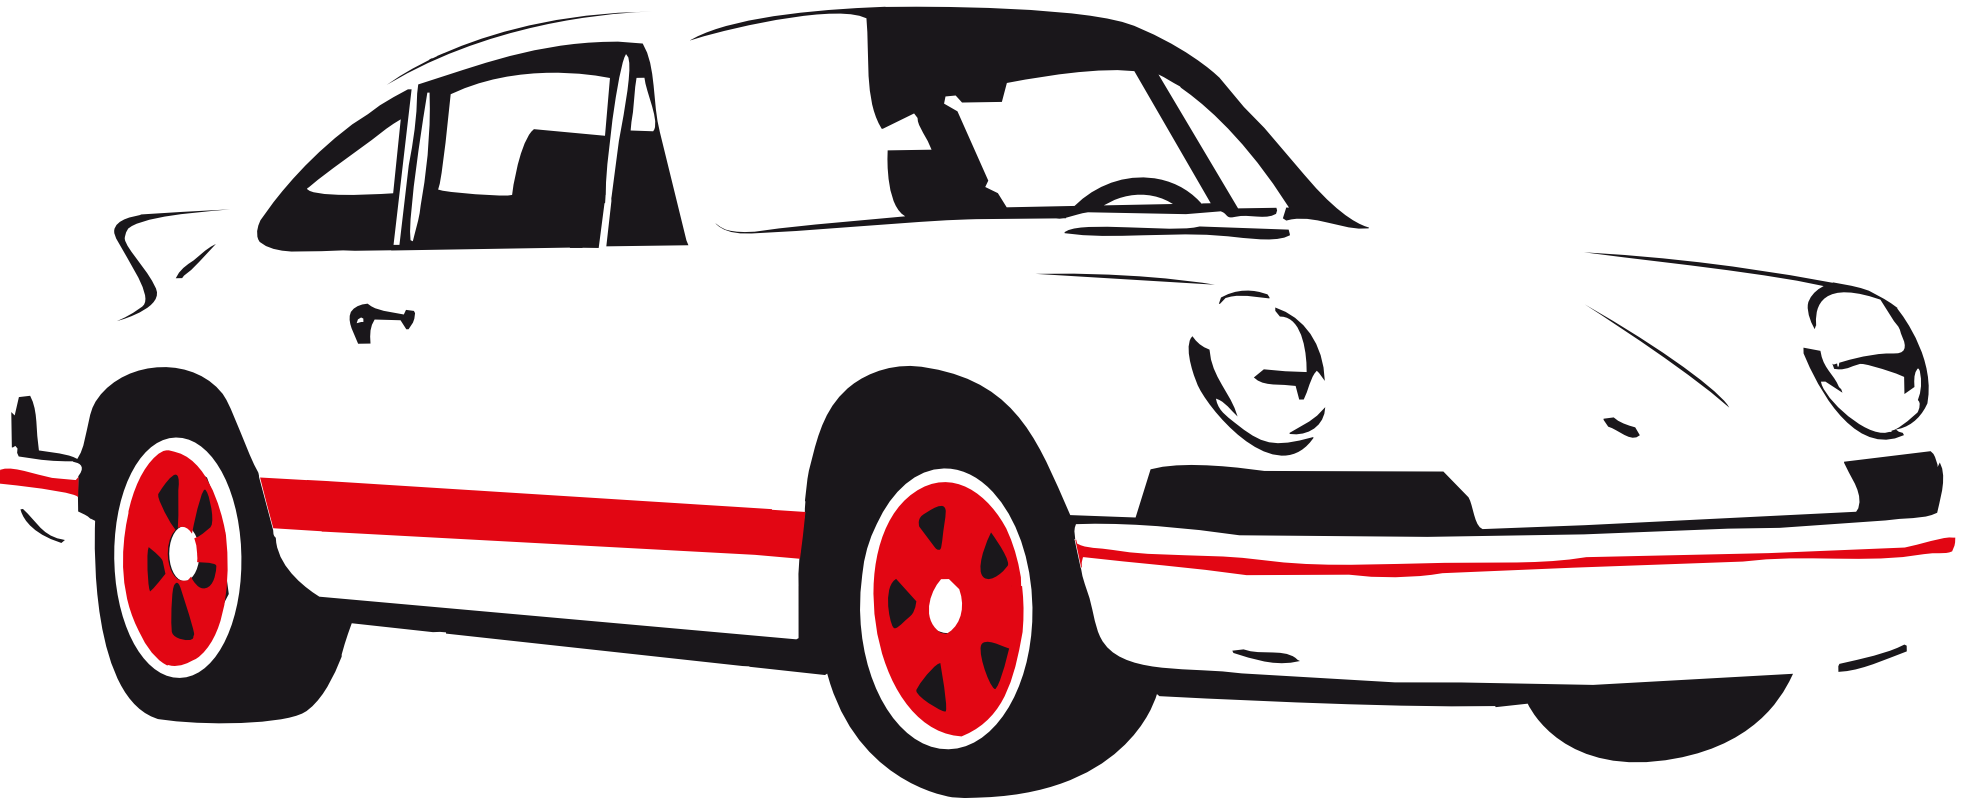 Sports car front clipart